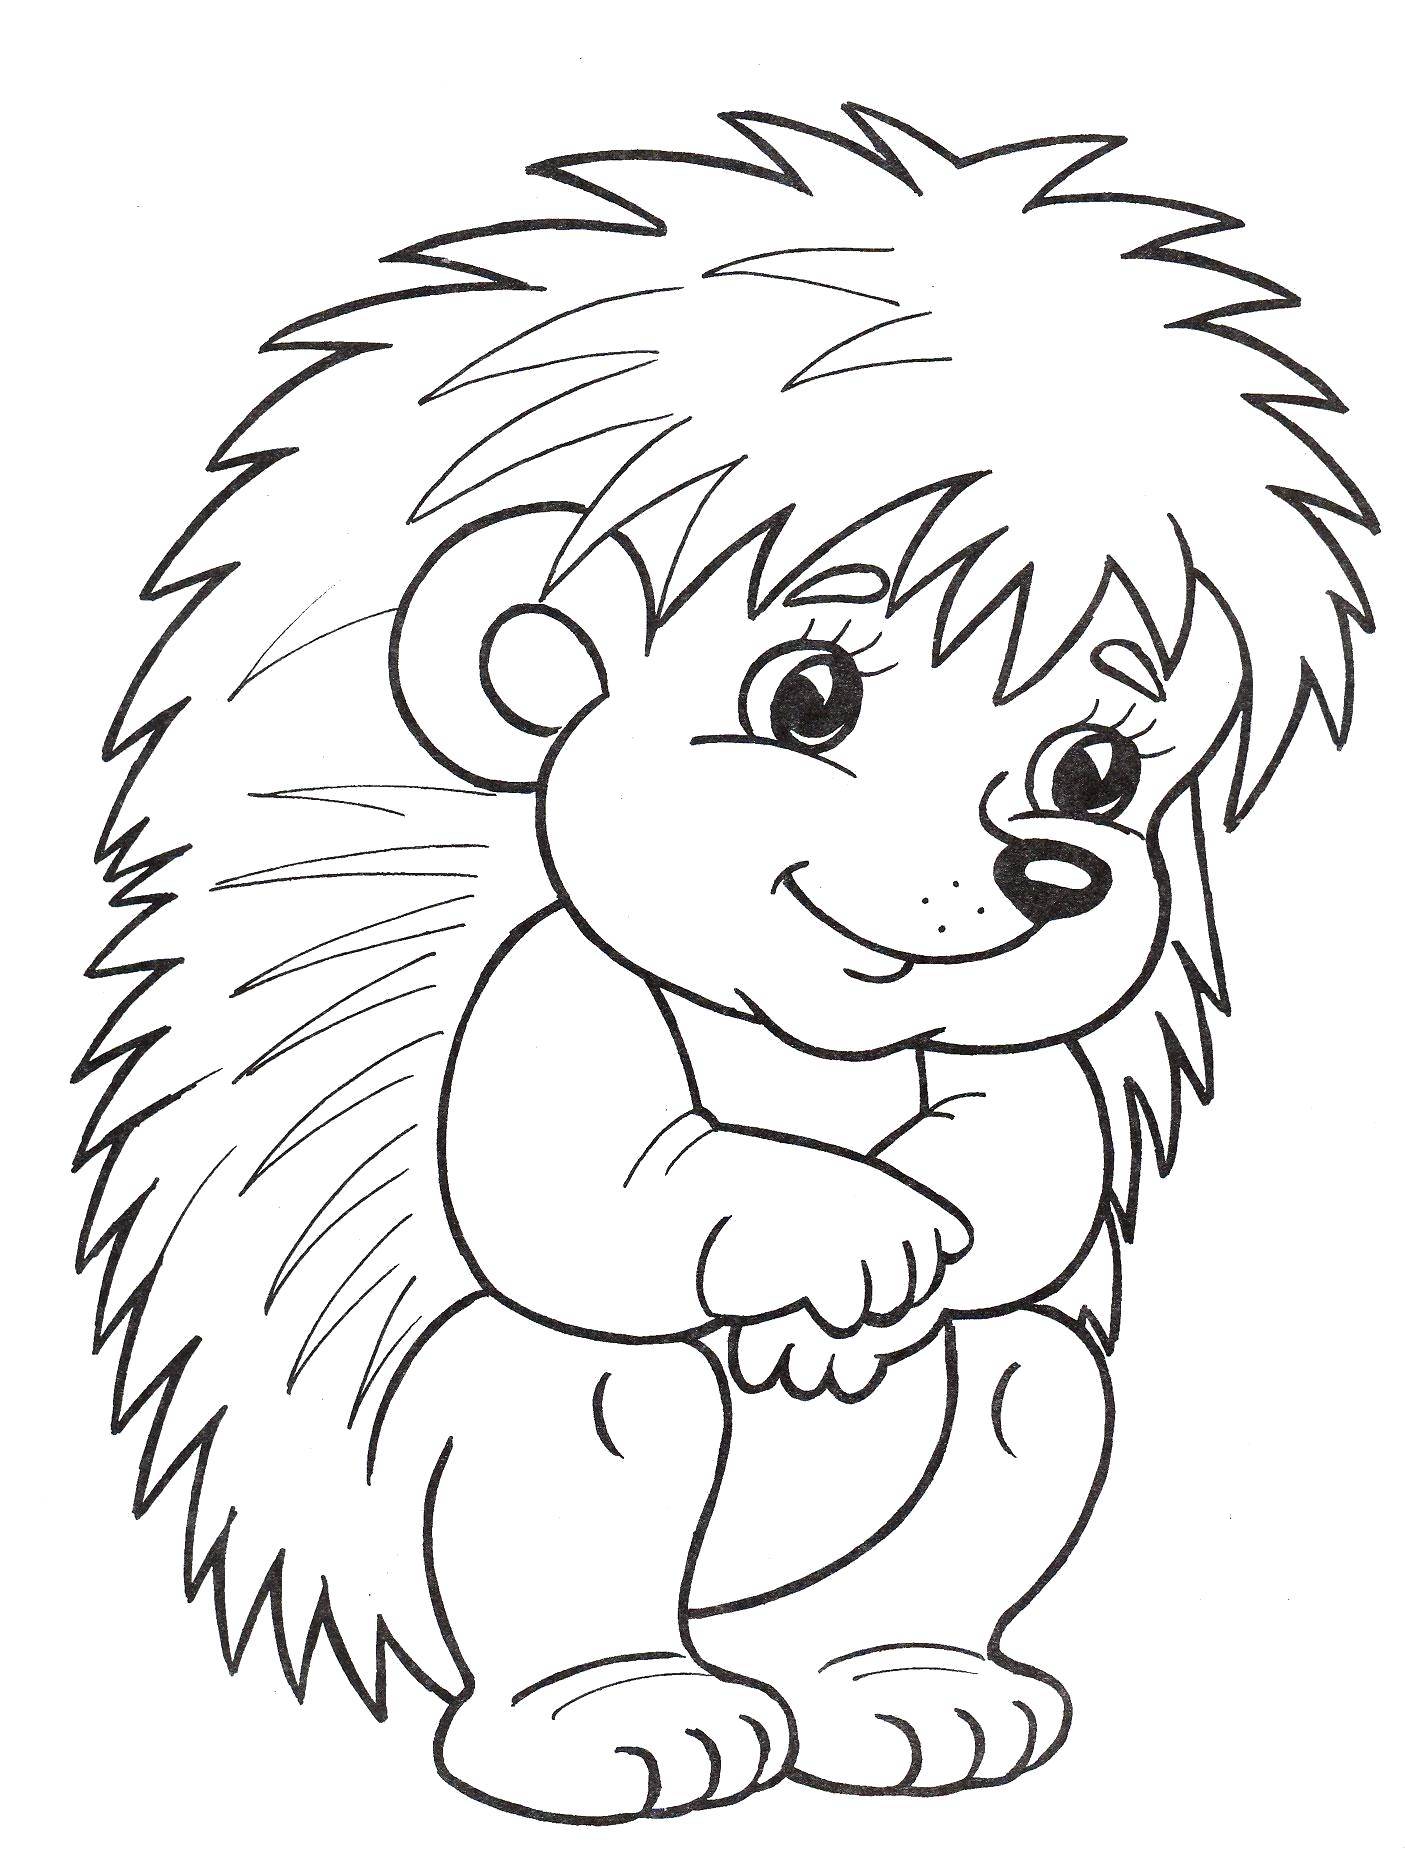 Coloring Cute hedgehog. Category Coloring pages for kids. Tags:  animals, hedgehog.